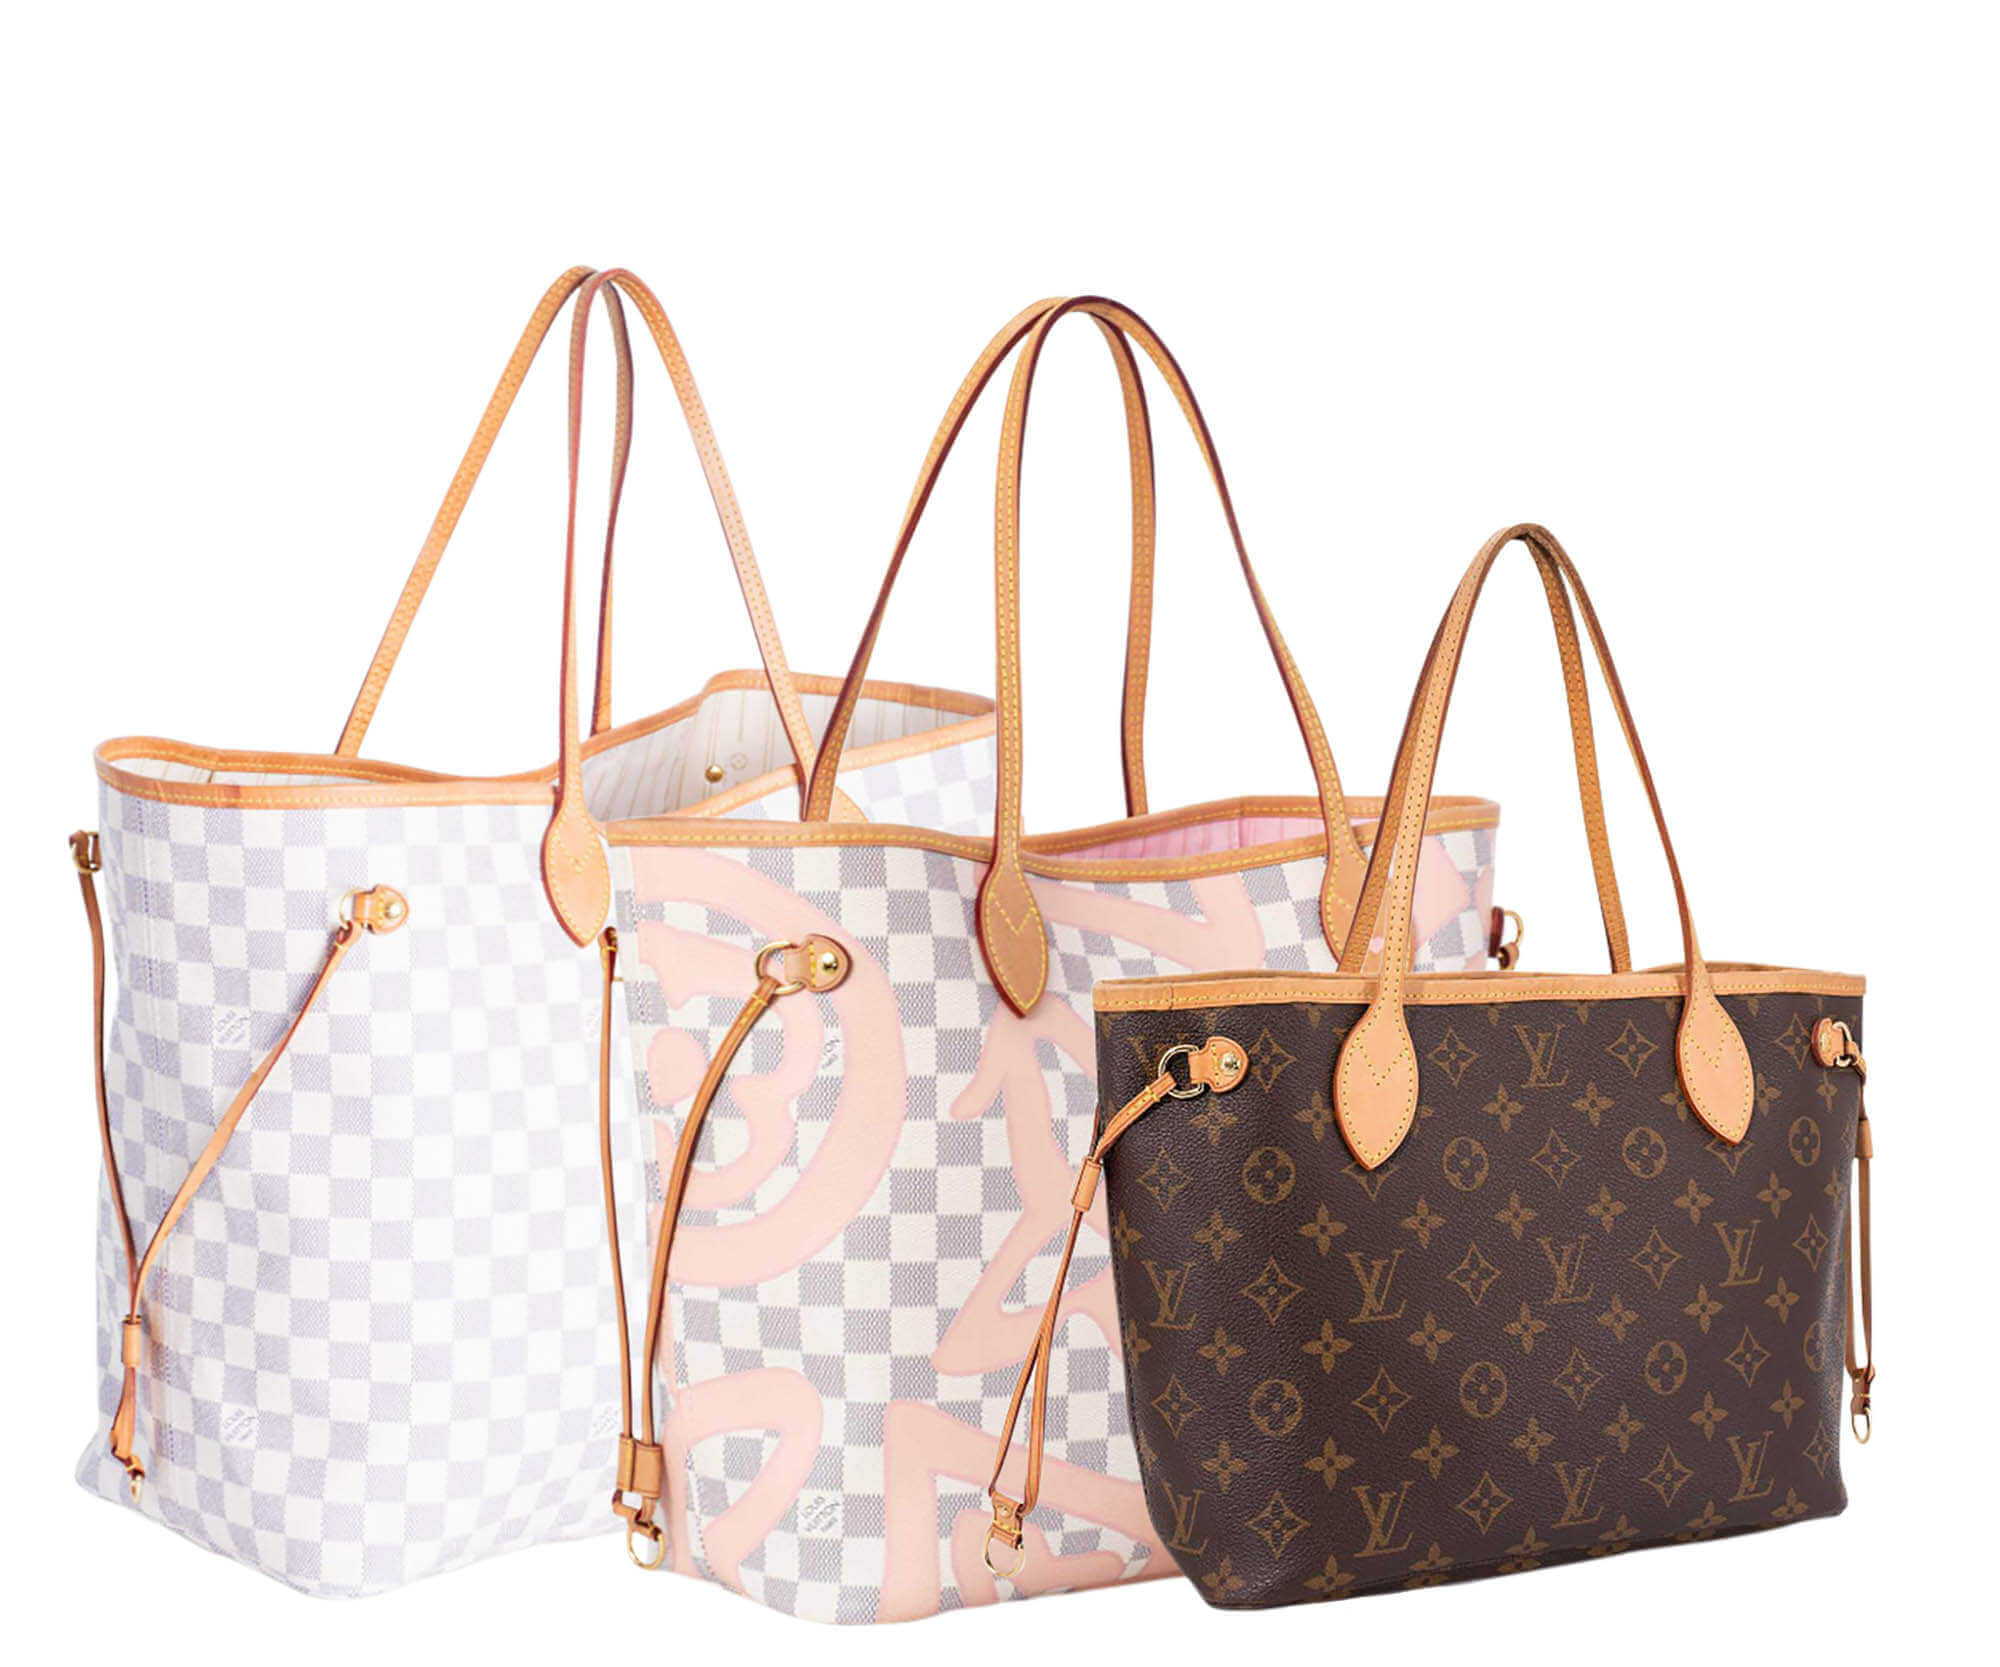 Different sizes of LV Neverfull bags